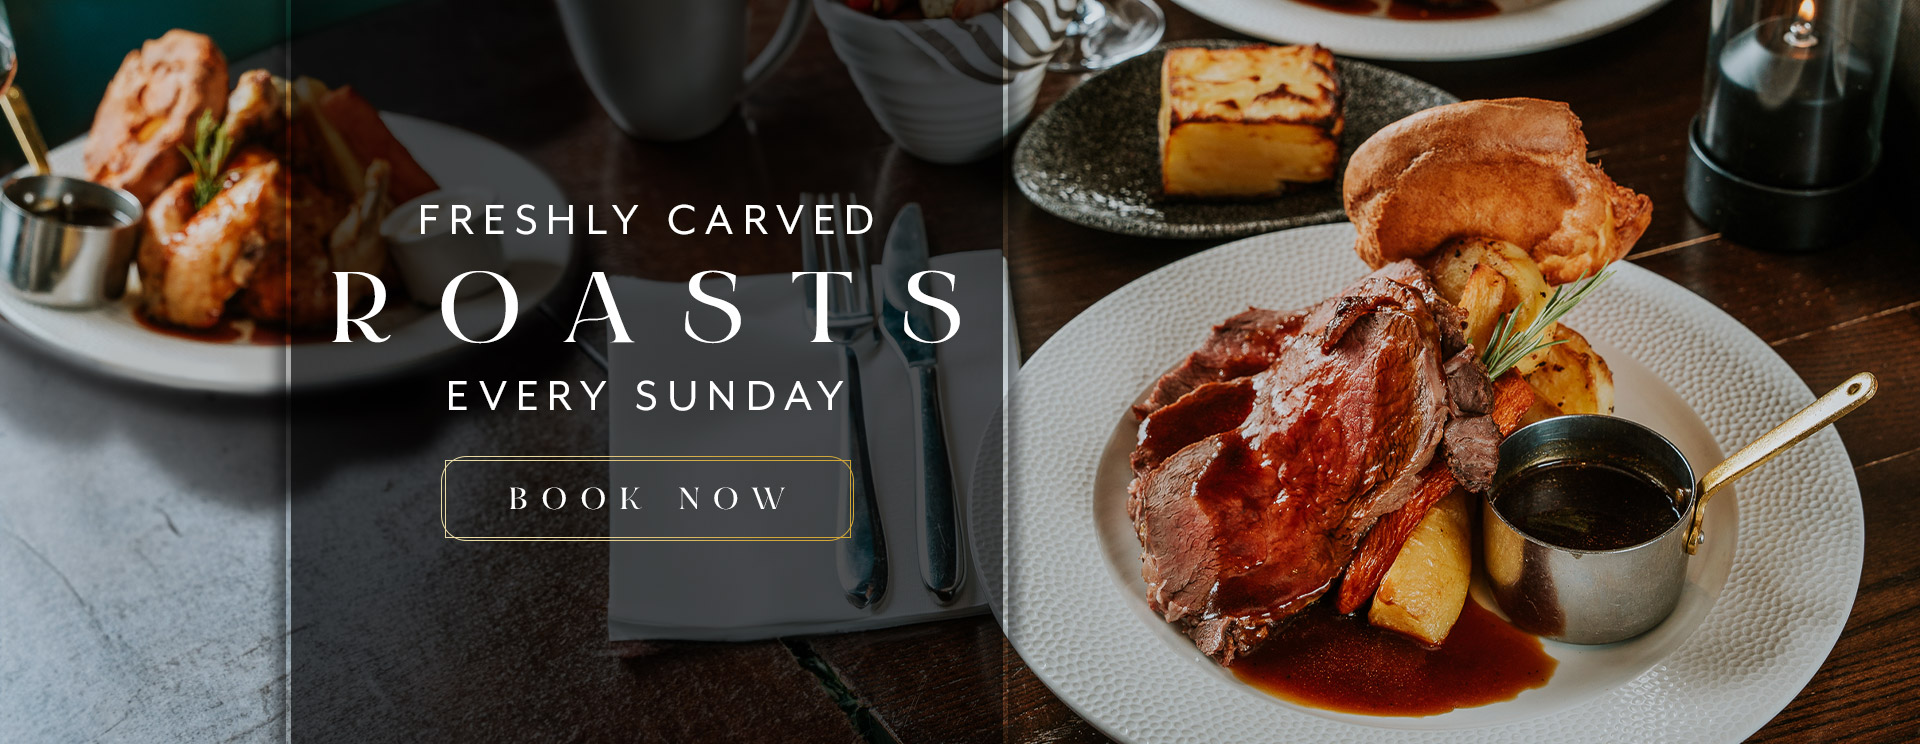 Sunday Lunch at The Midland